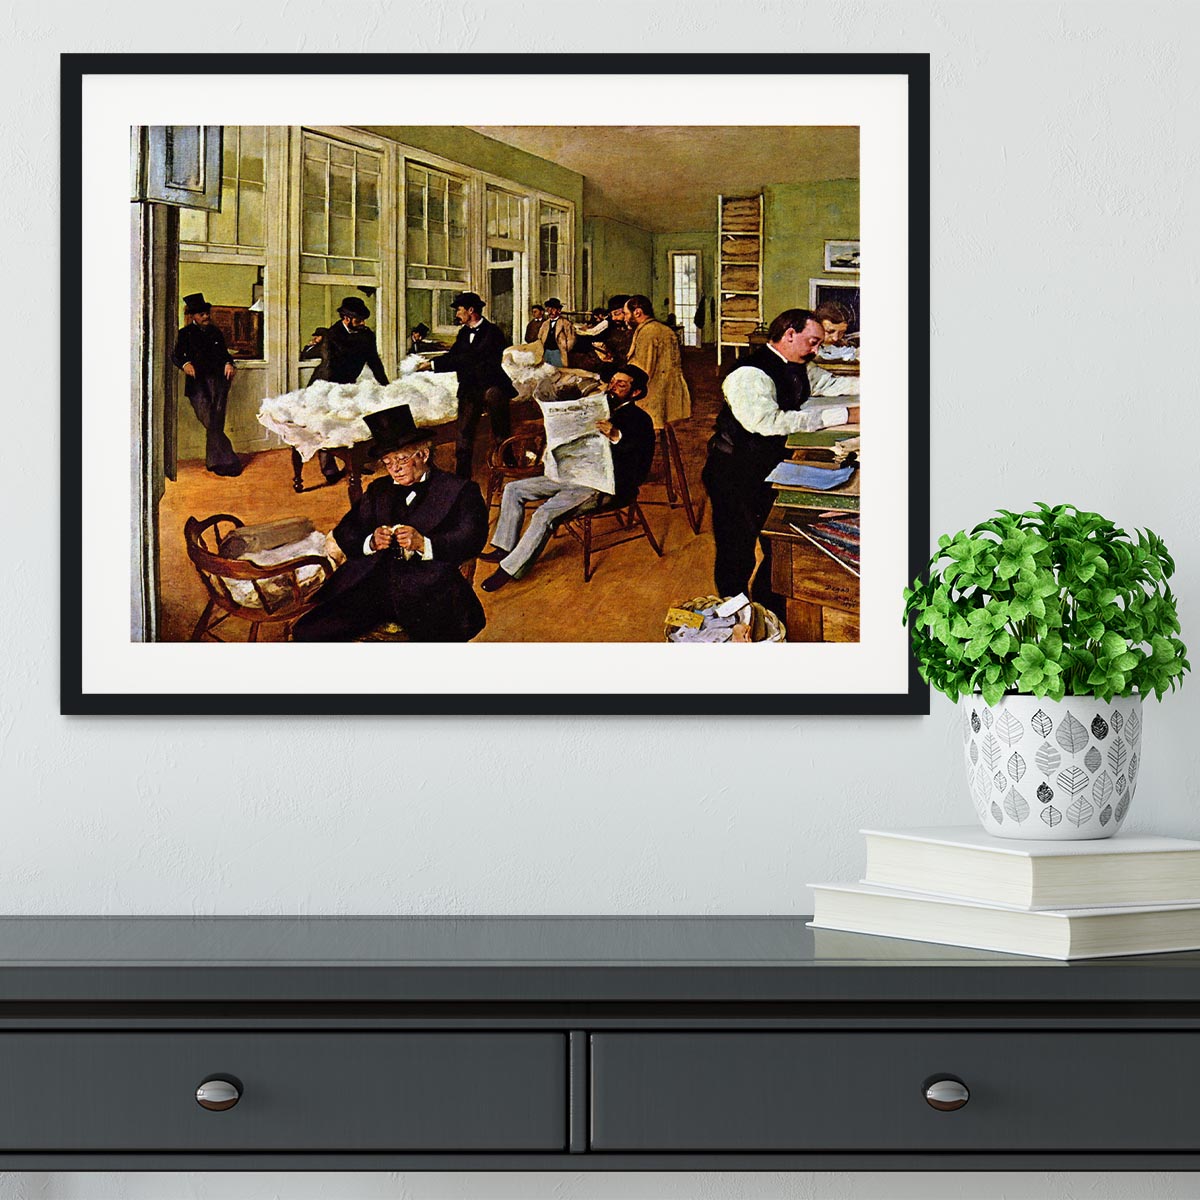 The cotton office in New Orleans by Degas Framed Print - Canvas Art Rocks - 1